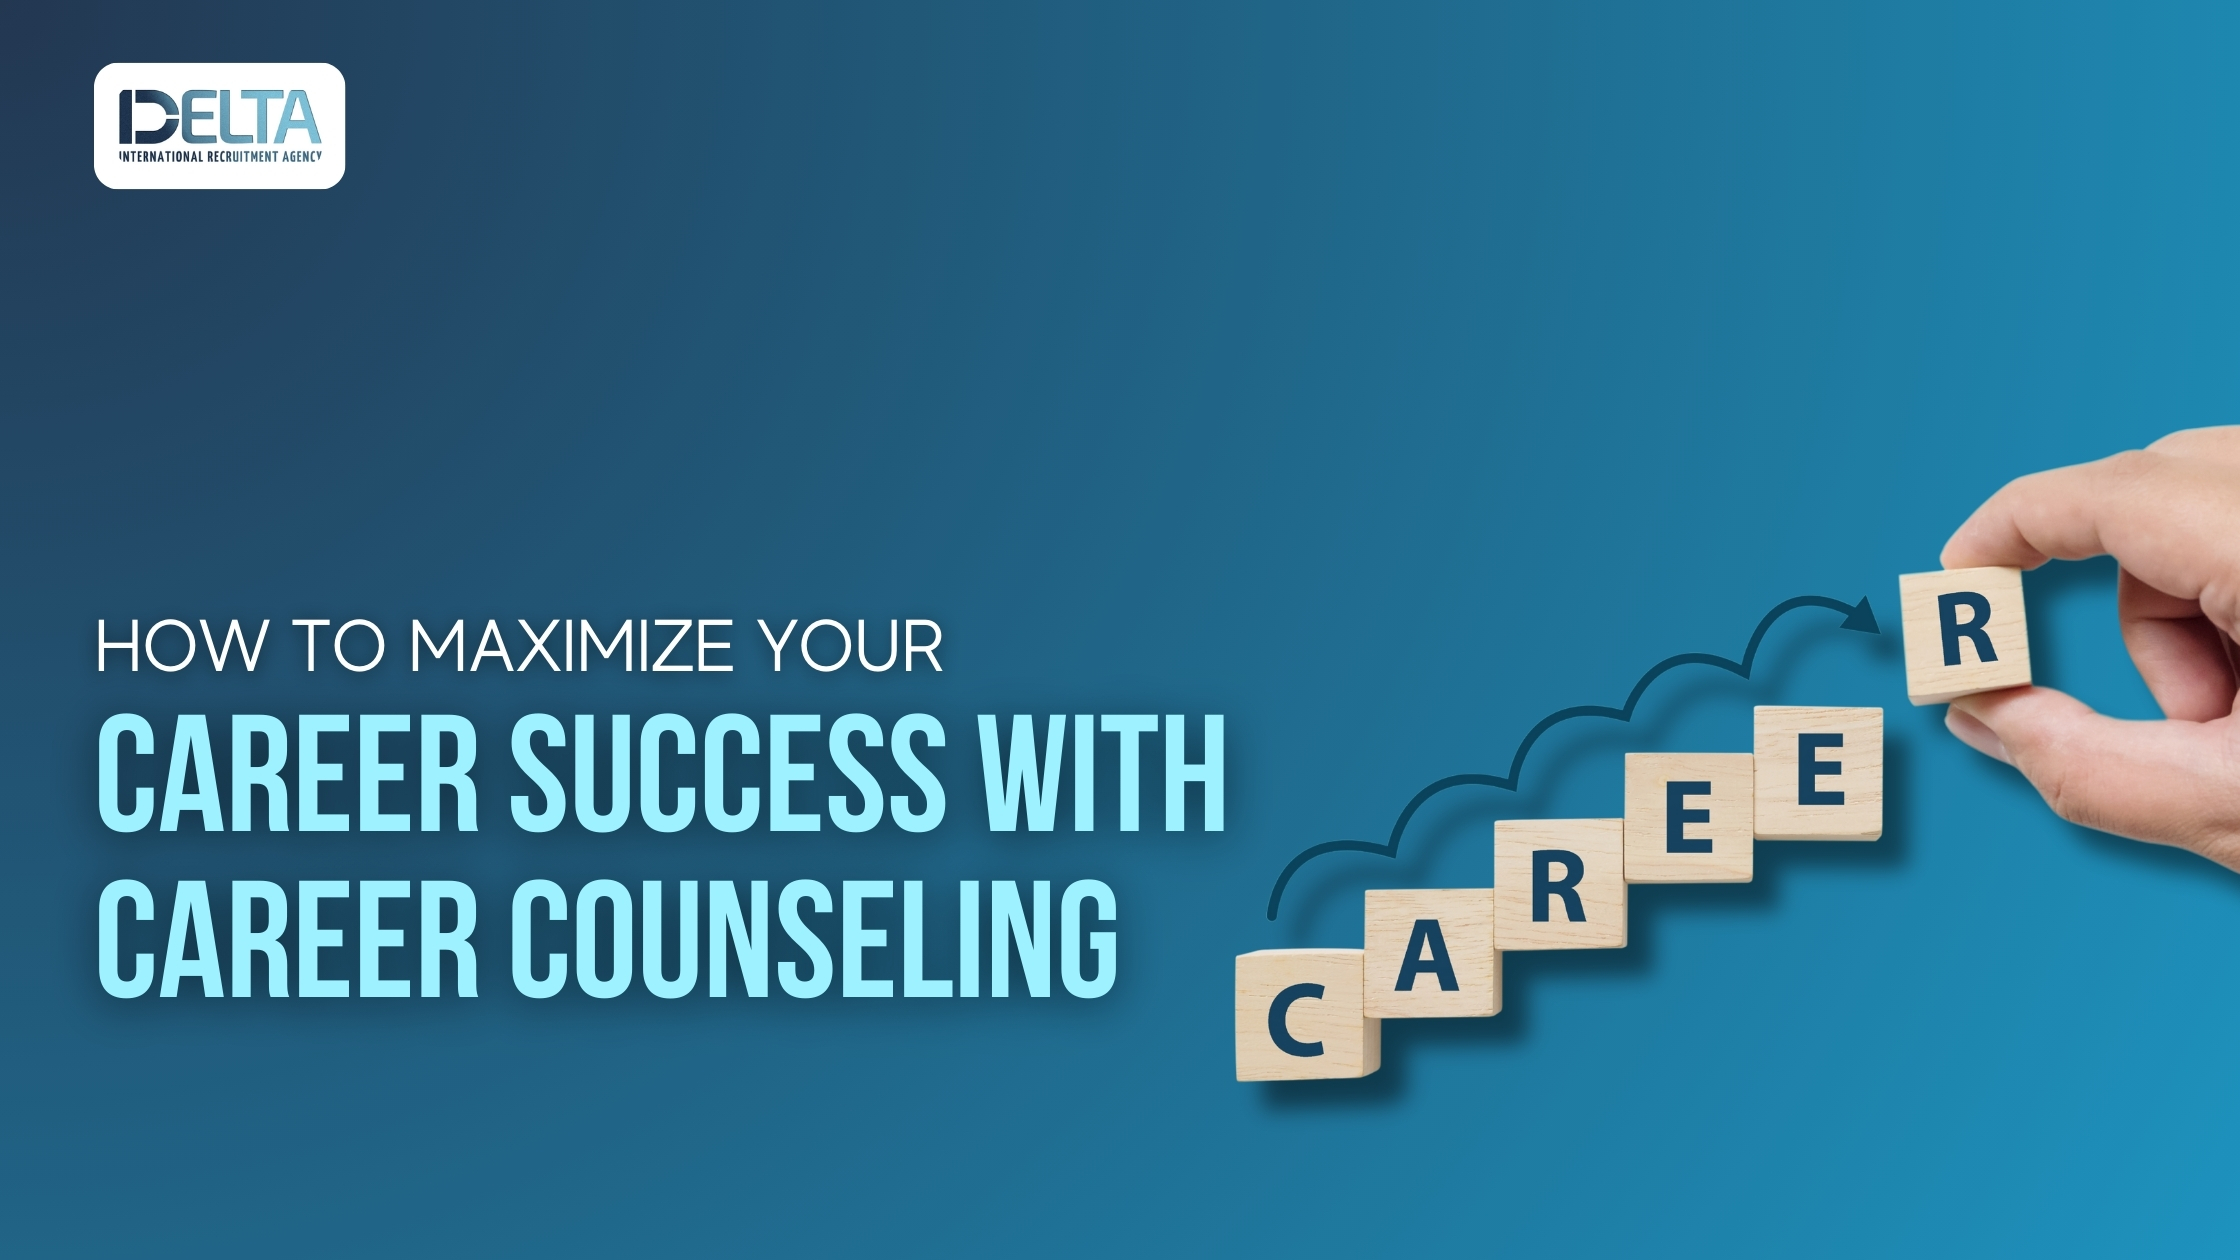 How to Maximize Your Career Success with Career Counseling